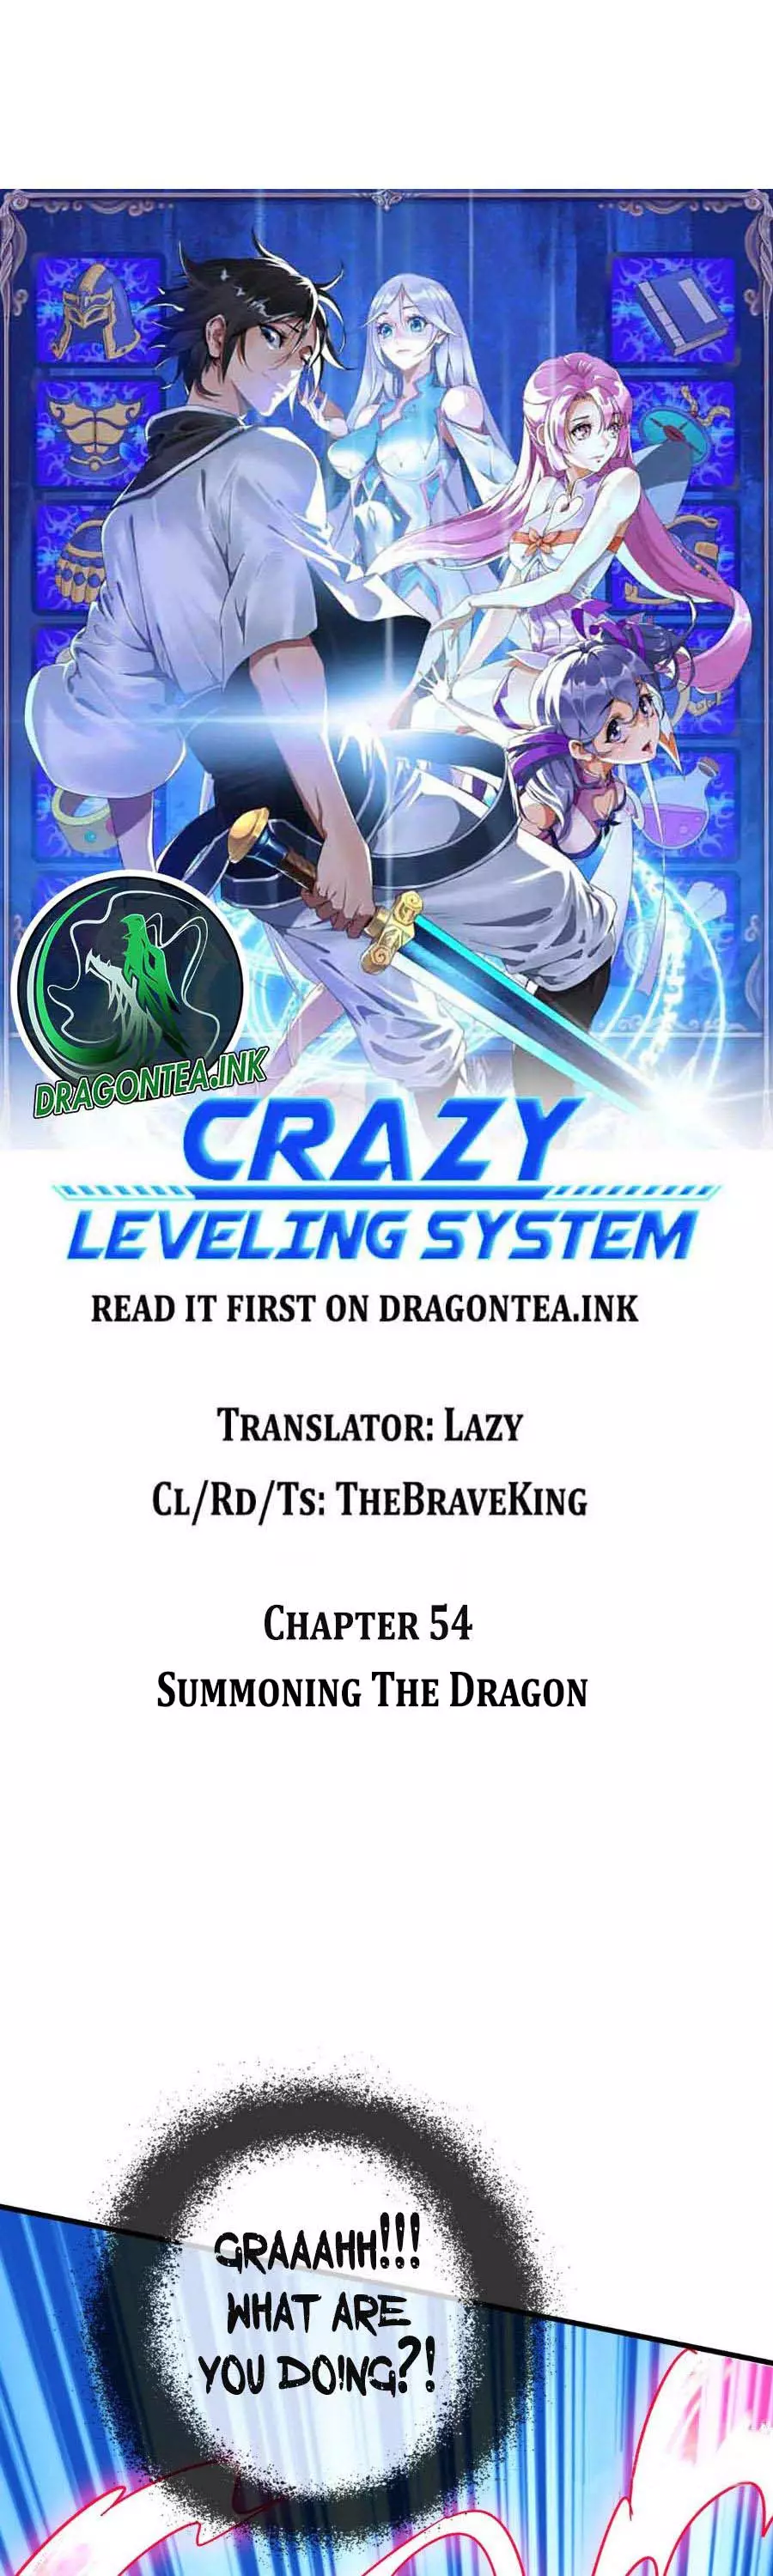 Crazy Leveling System - 54 page 11-a42849d7